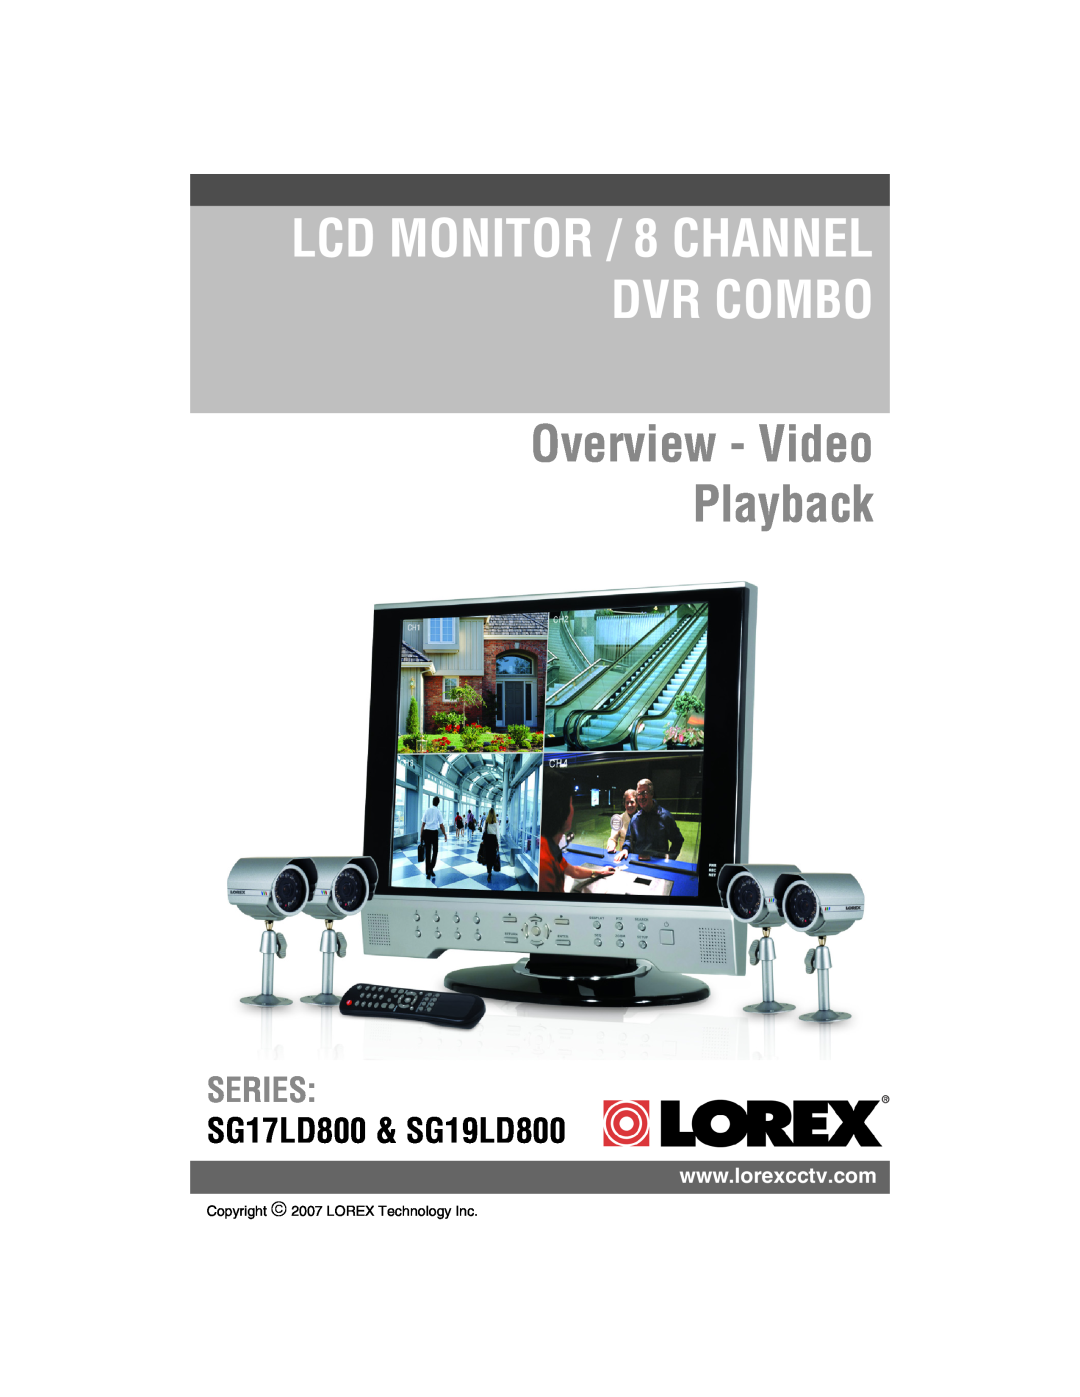 LOREX Technology SG19LD80 manual Overview - Video Playback, LCD MONITOR / 8 CHANNEL DVR COMBO, Series 